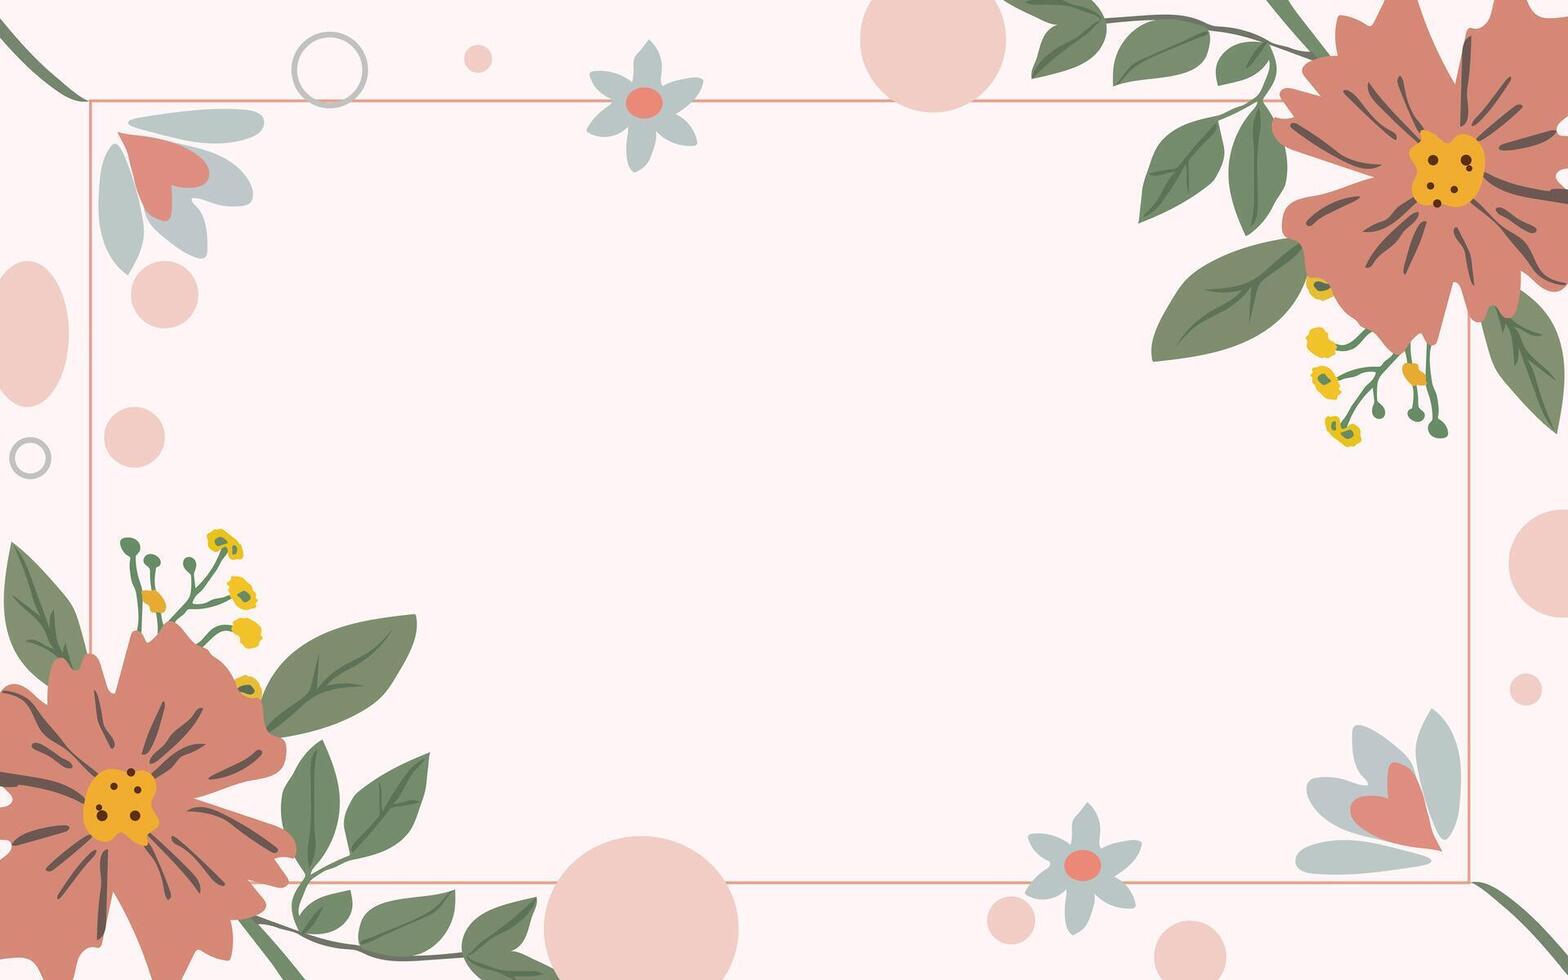 Abstract Background with flowers and bagde vector